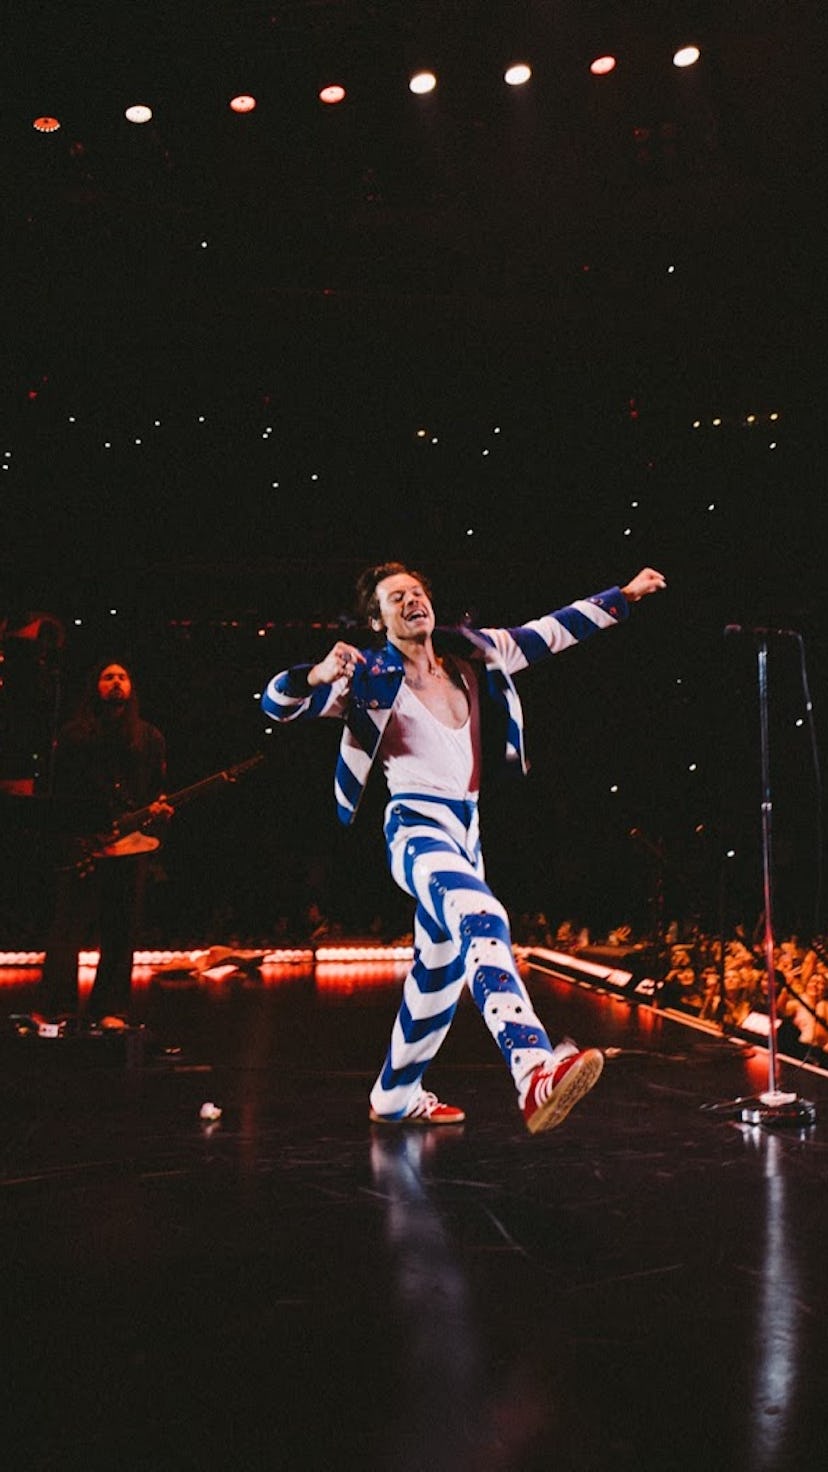 Harry Styles kicked off his 2022 'Harry's House' residency at Madison Square Garden in New York.